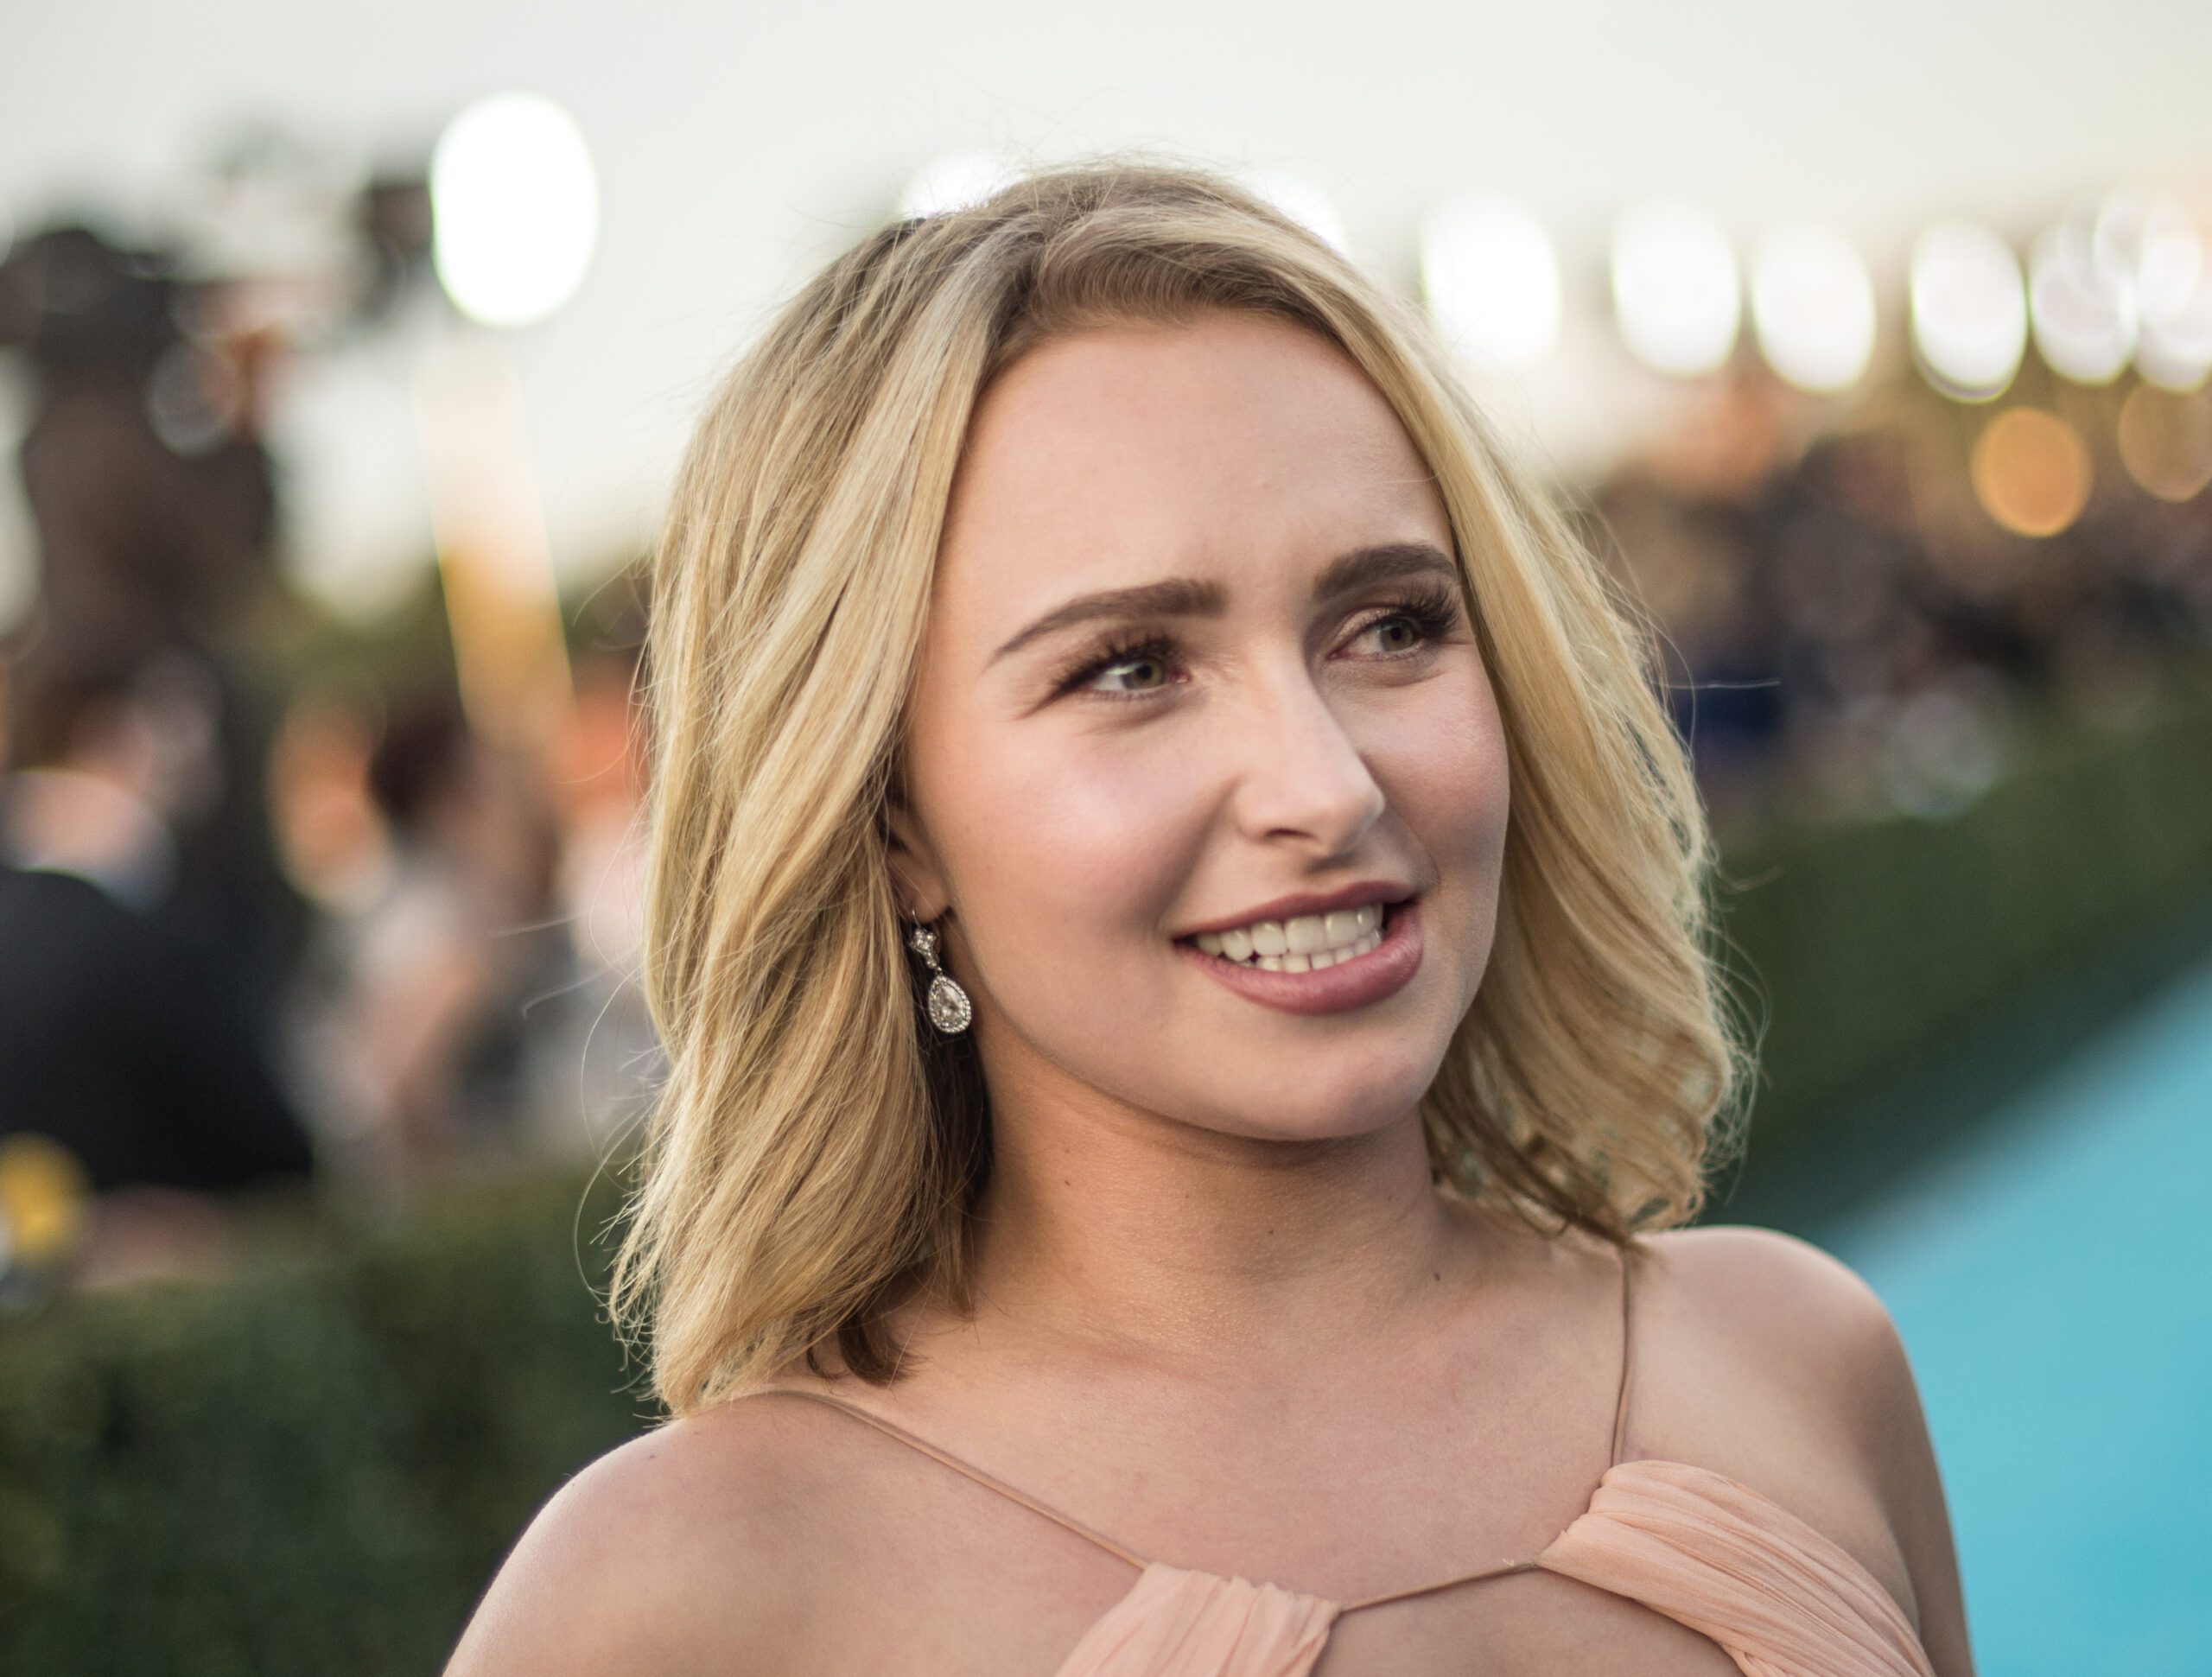 ‘most-heartbreaking-thing’:-actress-hayden-panettiere-discusses-giving-up-custody-of-daughter-while-battling-drug-and-alcohol-addiction